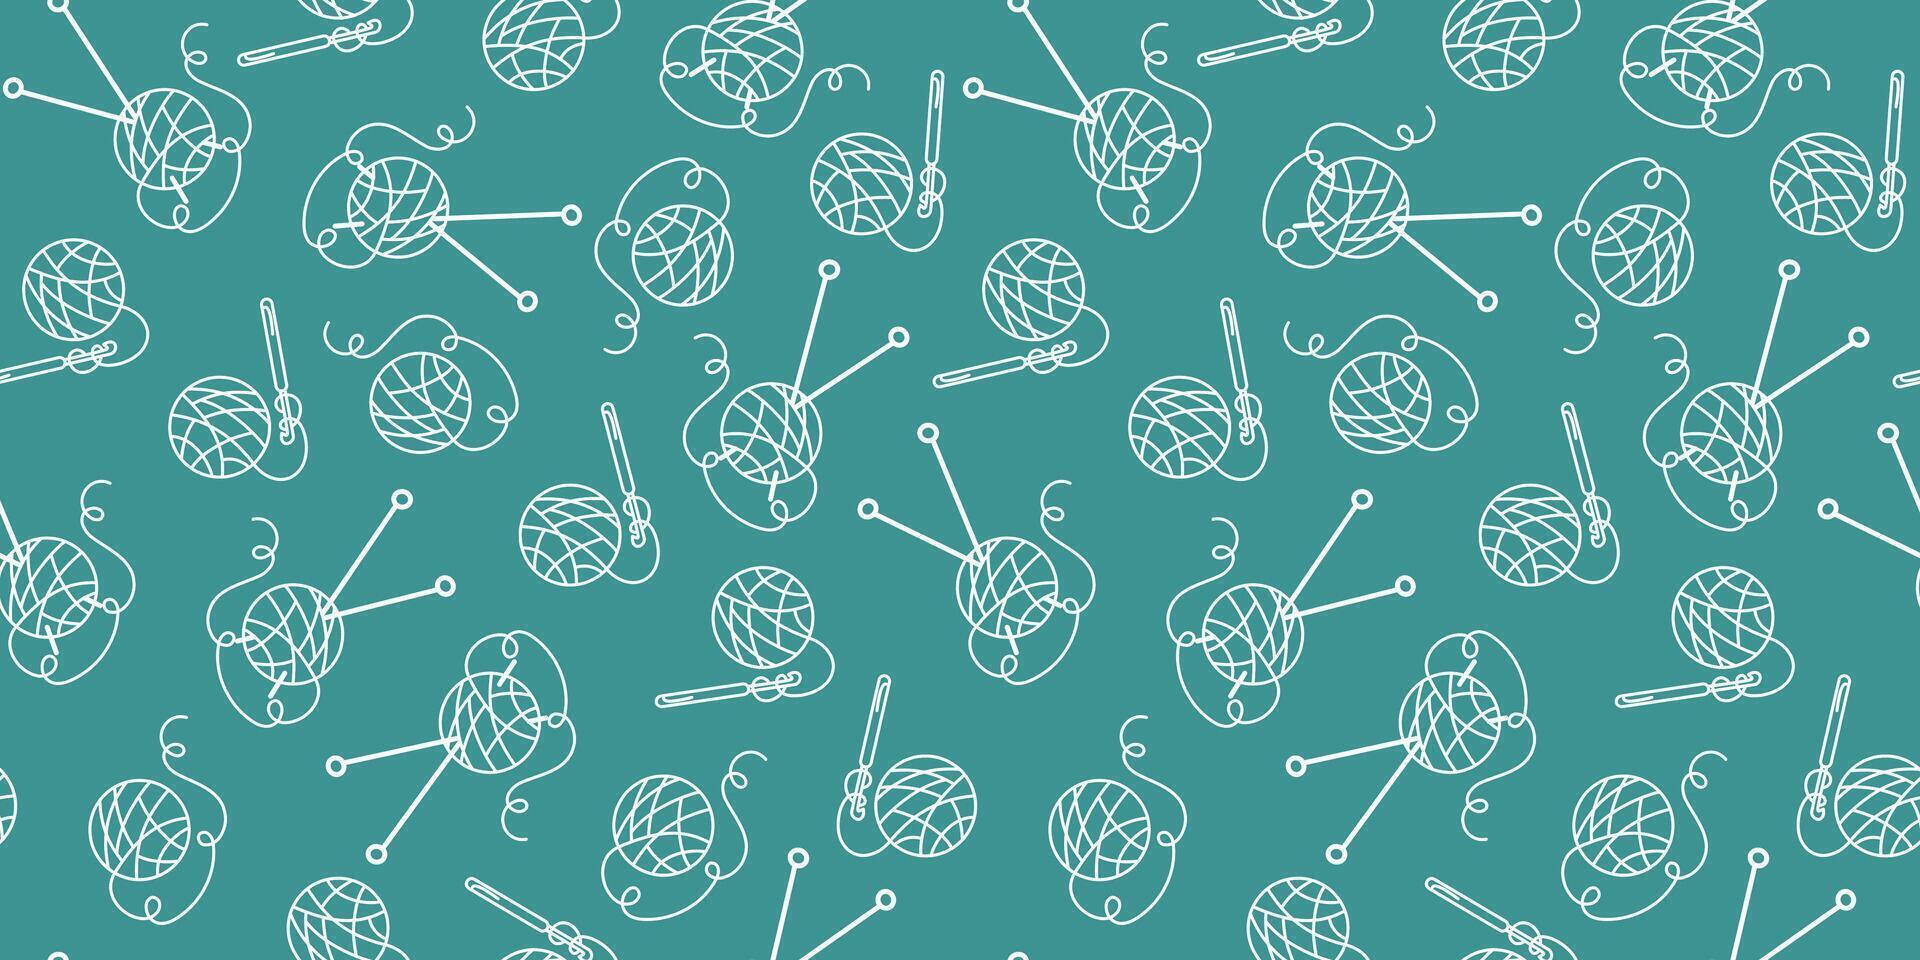 Pattern. Hobbies, Crafts, Handmade. Threads  skein. A ball of wool. Doodle style. Items and tools for knitting. Vector seamless background.